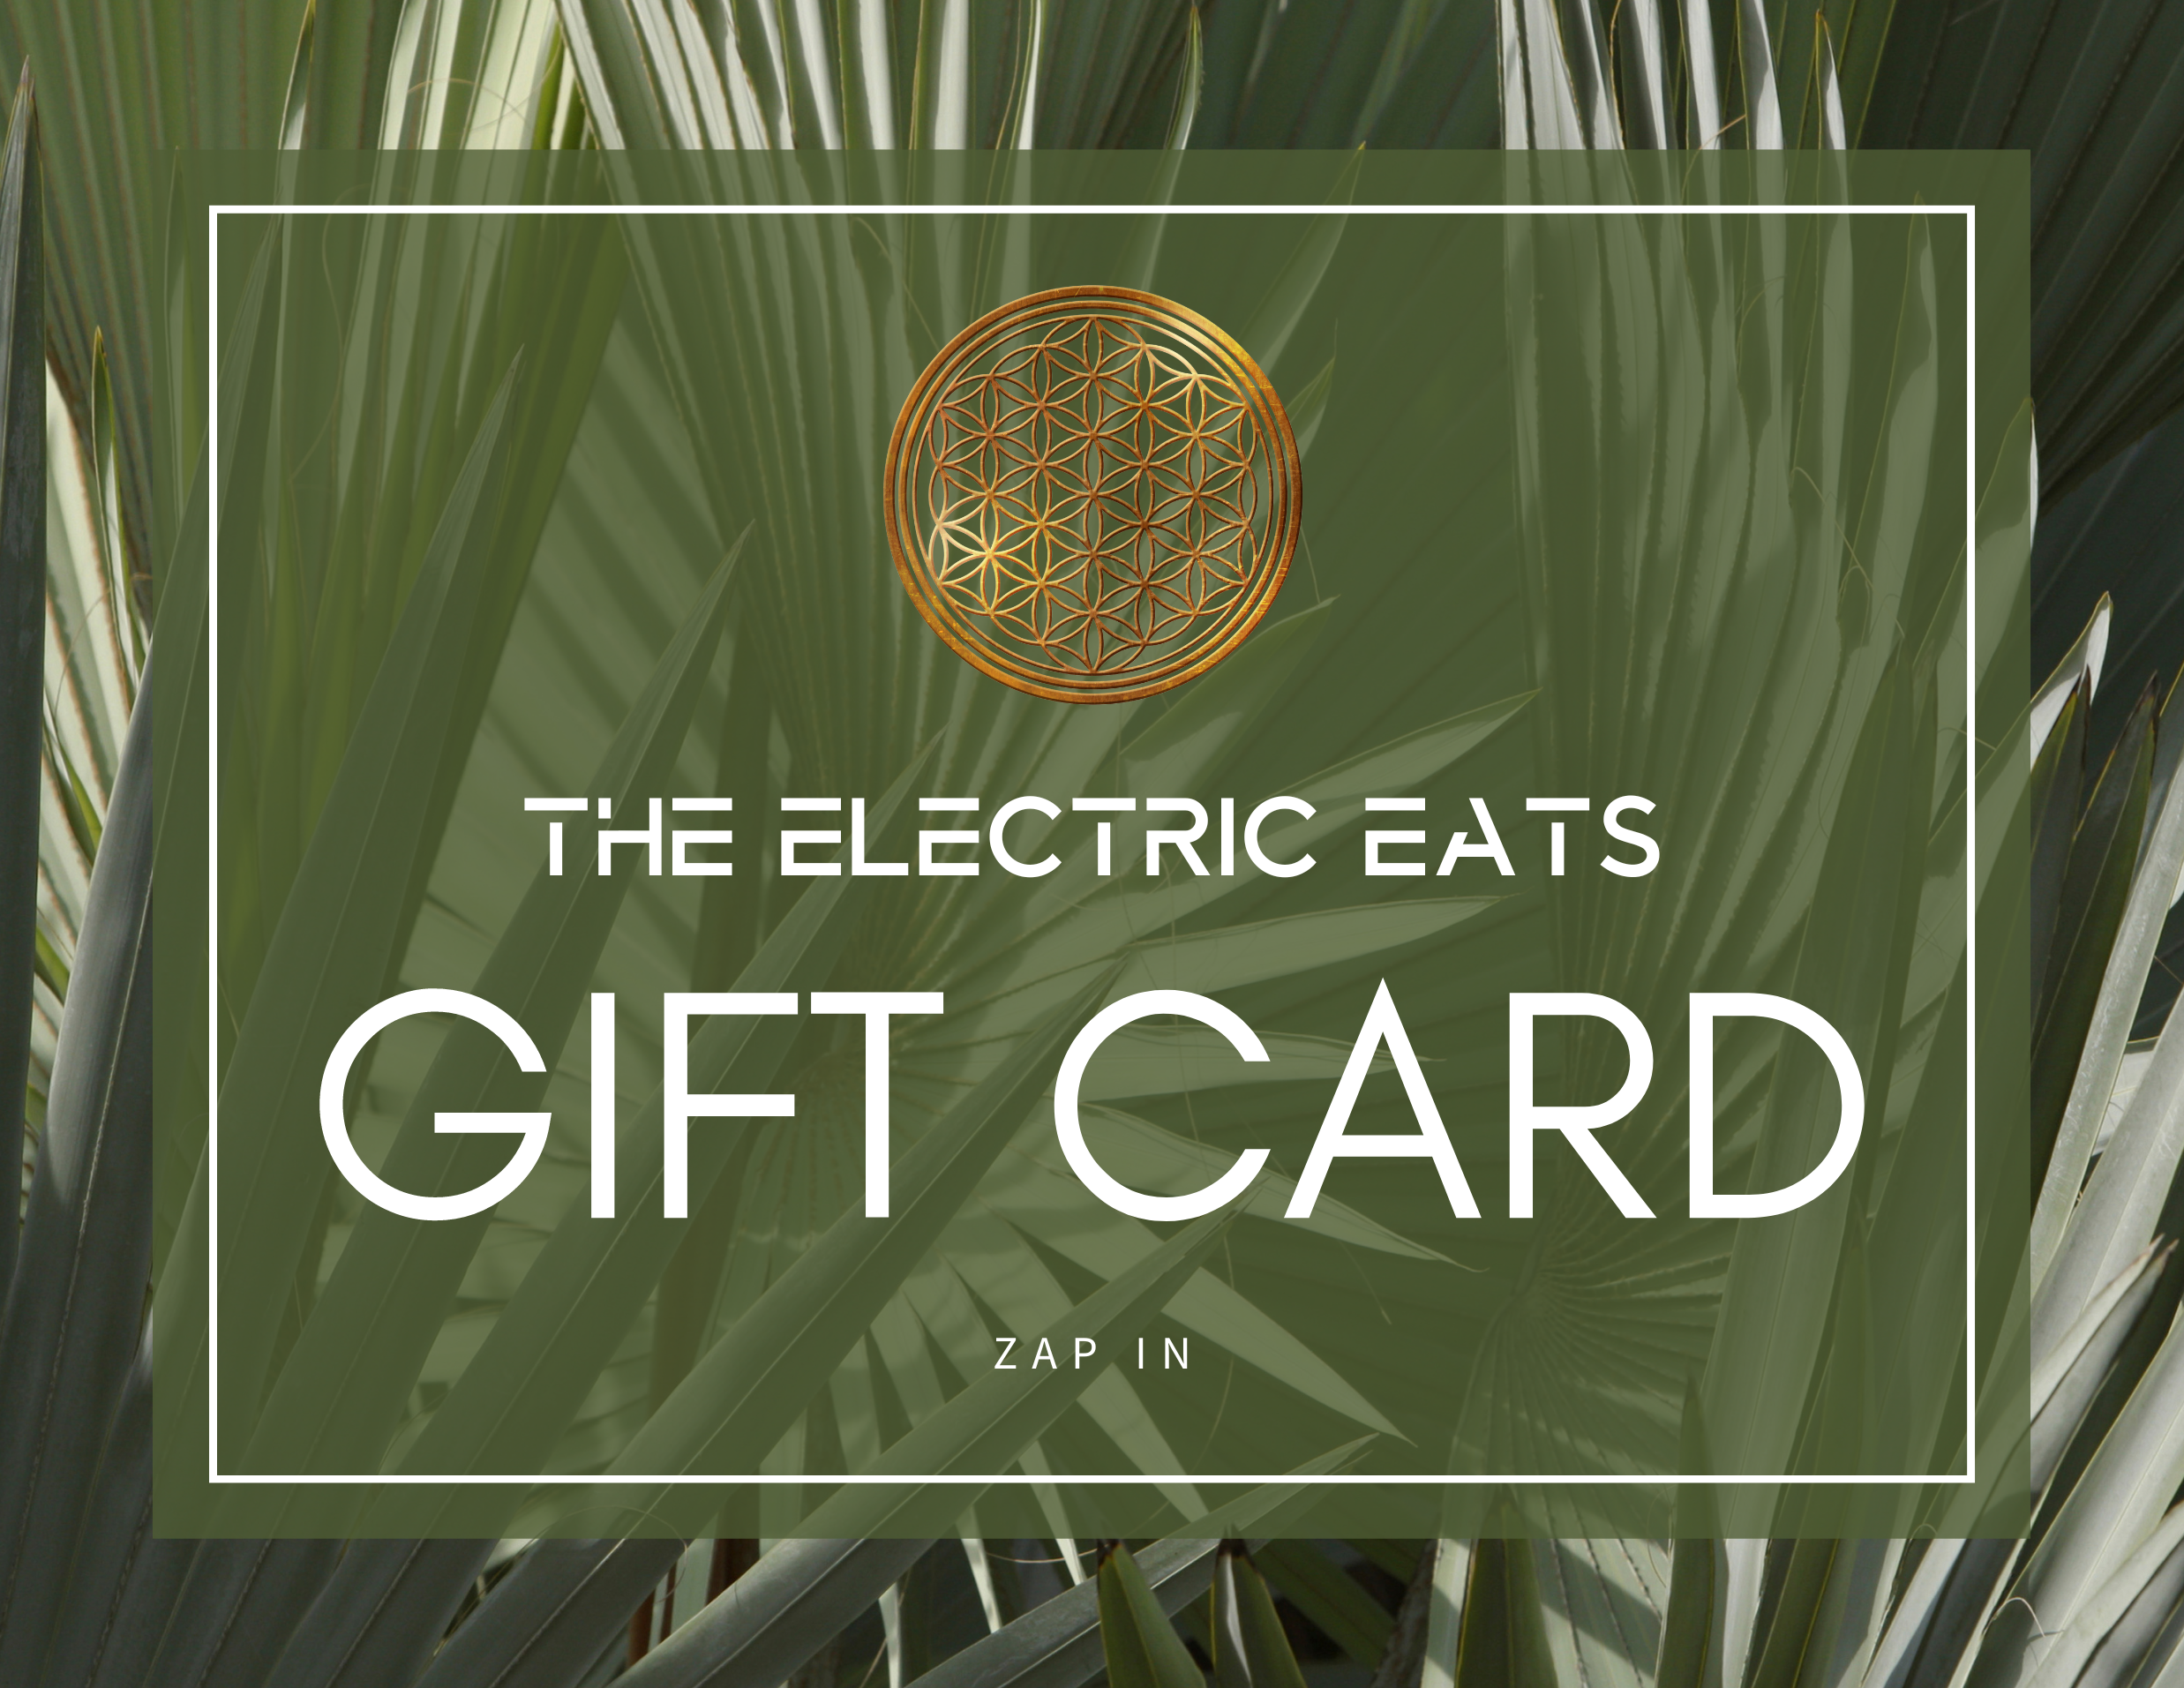 The Electric Eats Gift Card